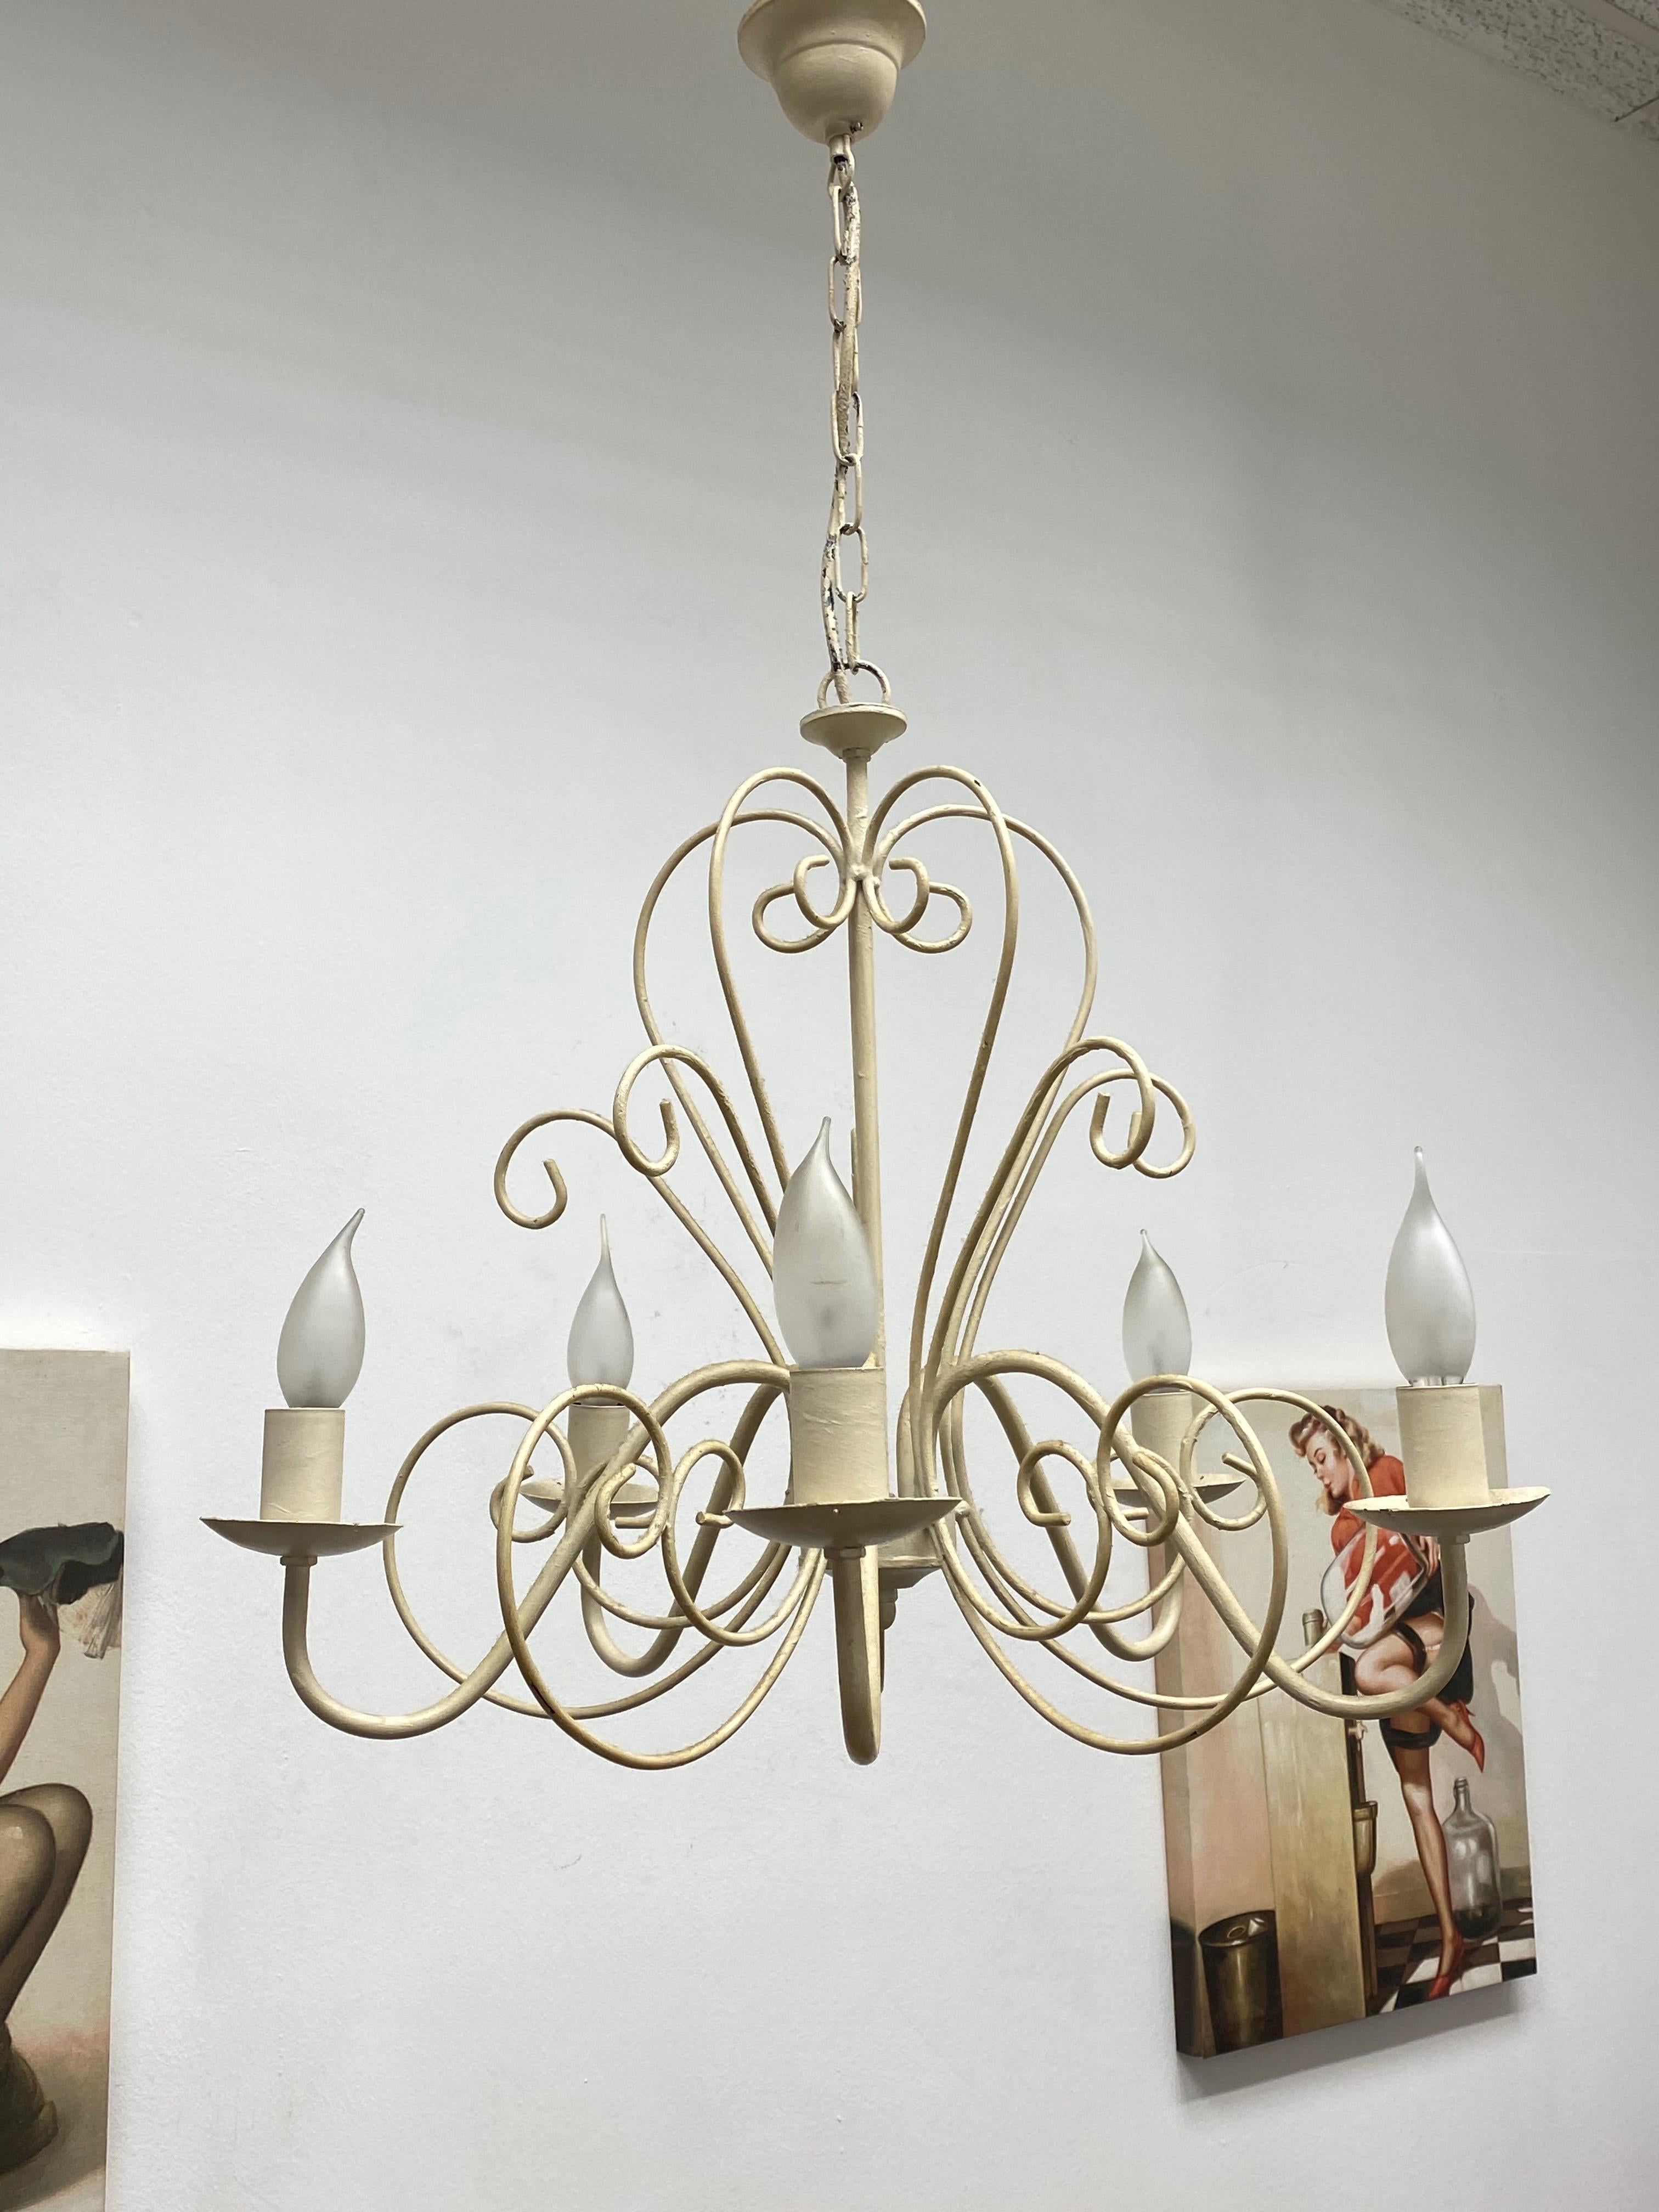 Add a touch of opulence to your home with this charming chandelier! It looks like a castle chandelier, to enhance any chic or eclectic home. We'd love to see it hanging in an entryway as a charming welcome home. The fixture requires five European